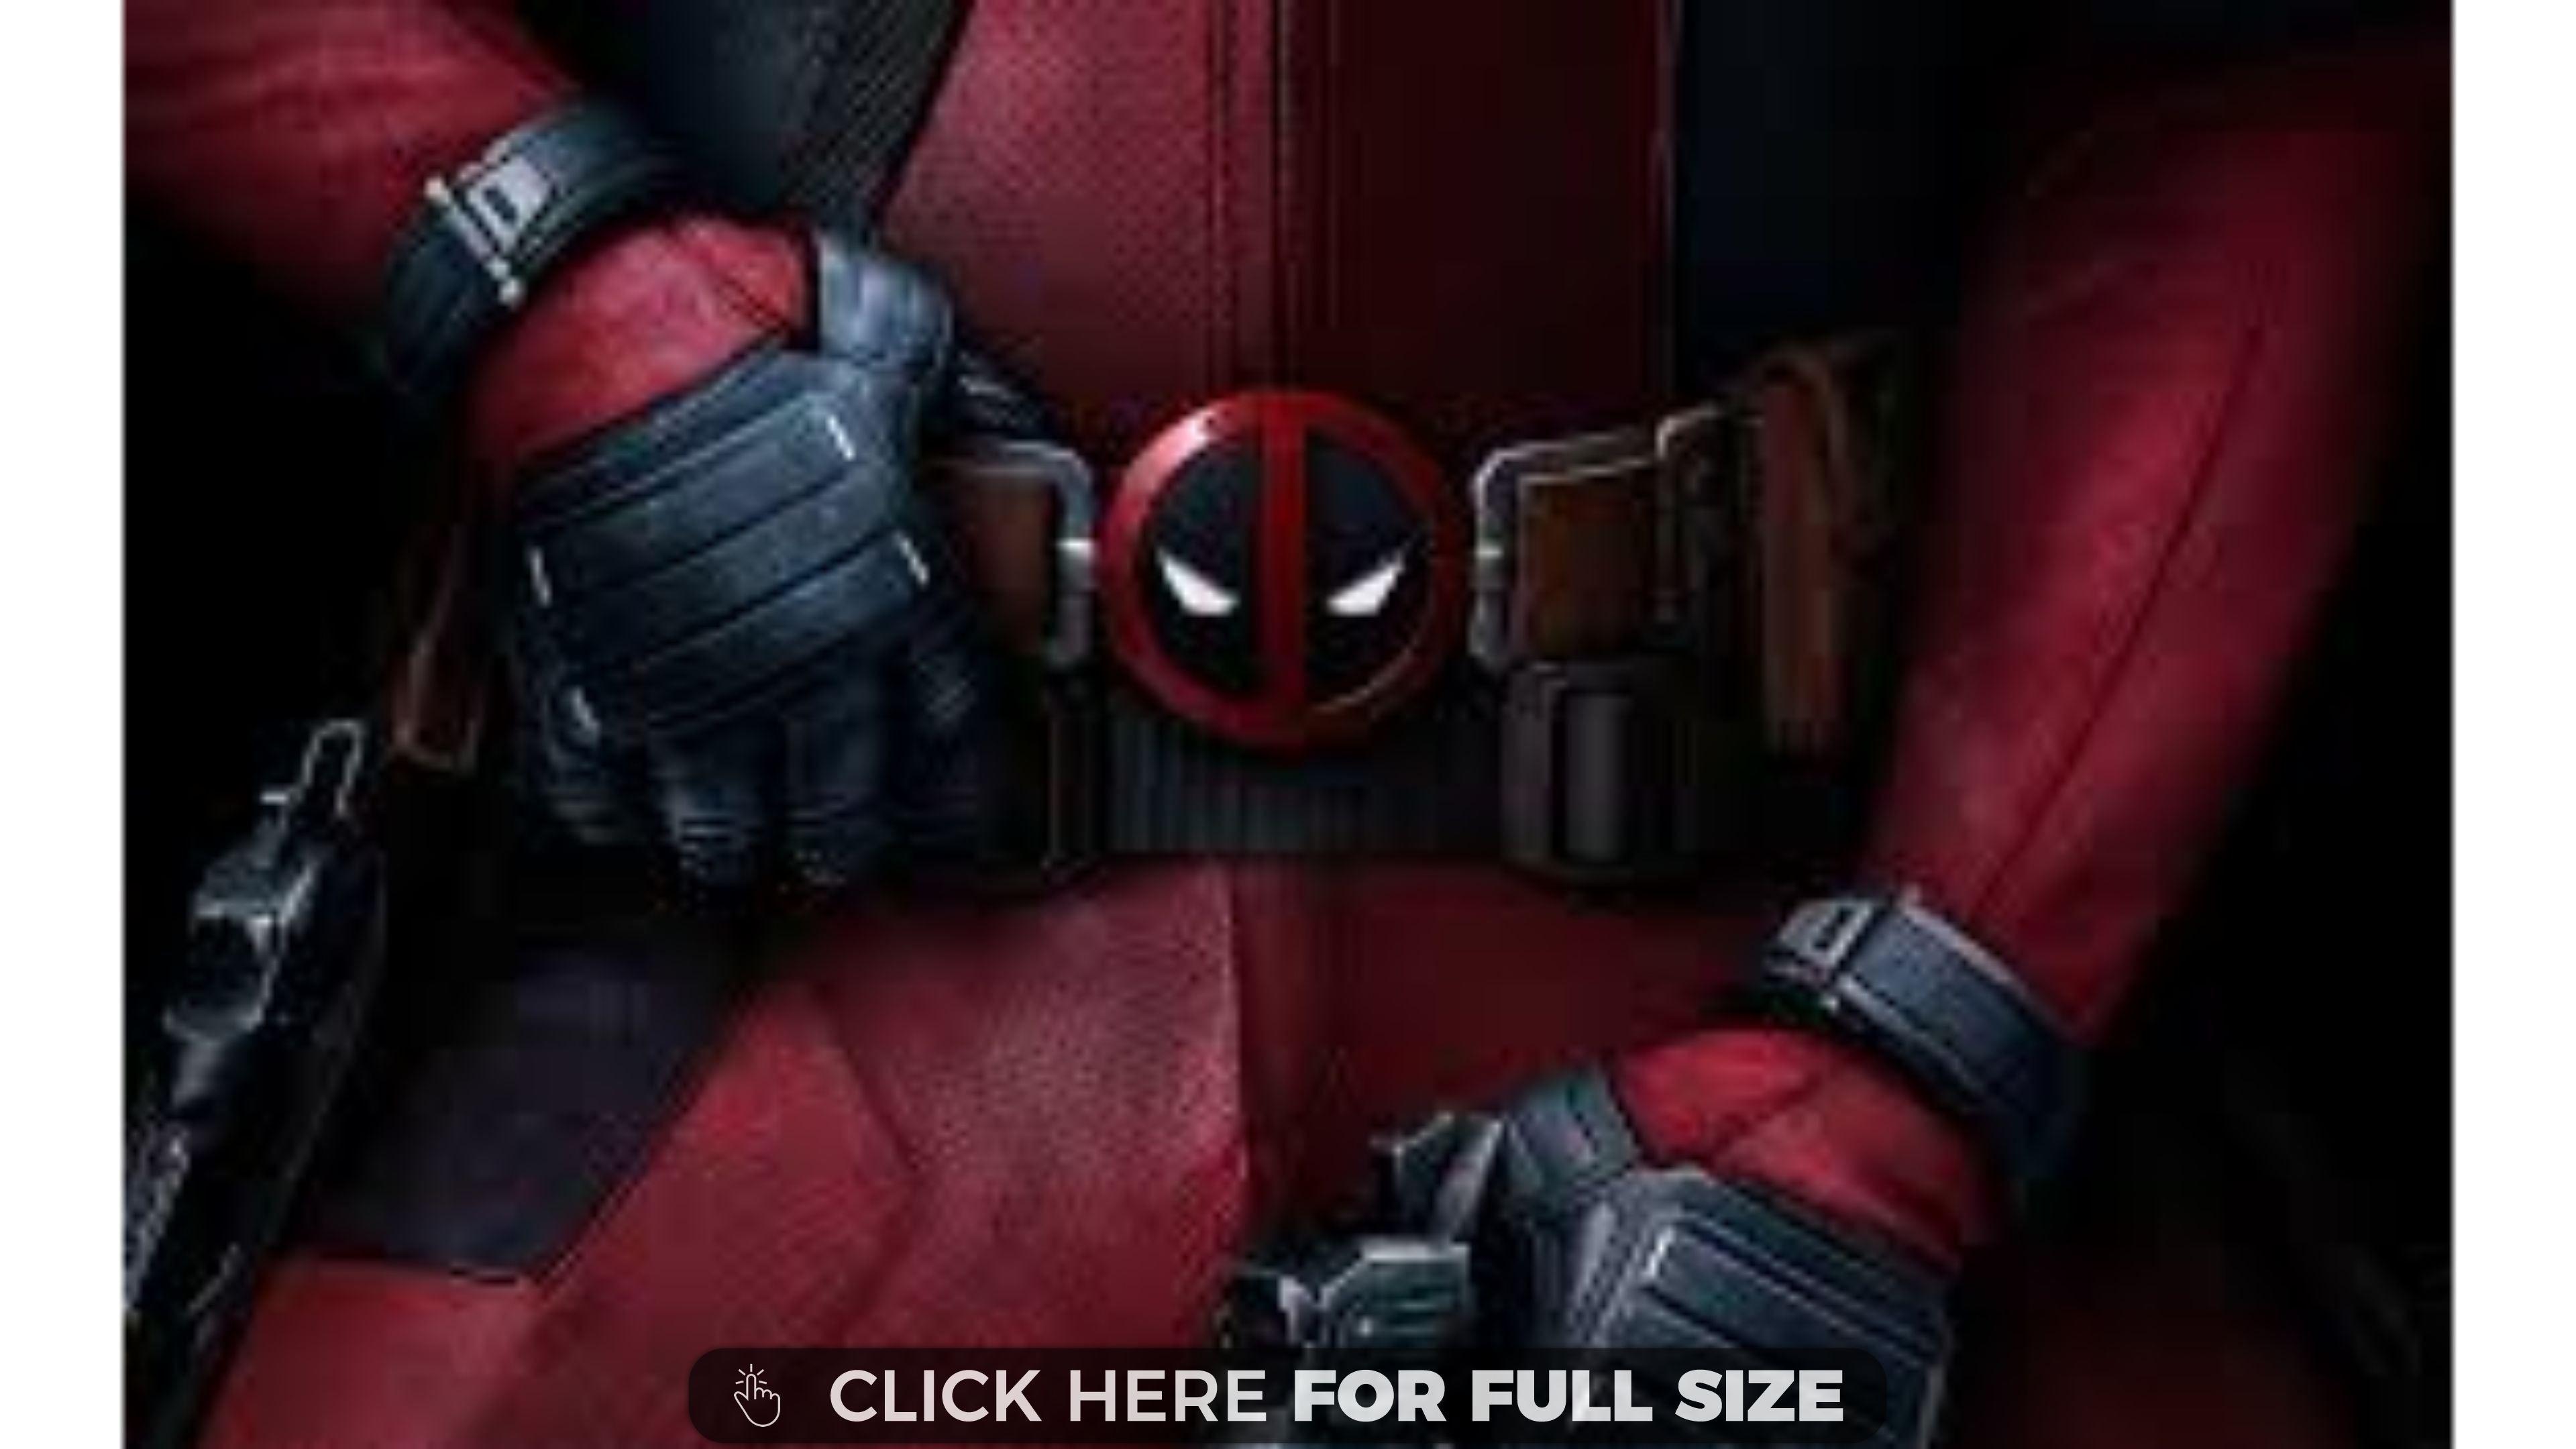 deadpool wallpaper, photo and desktop background up to 8K